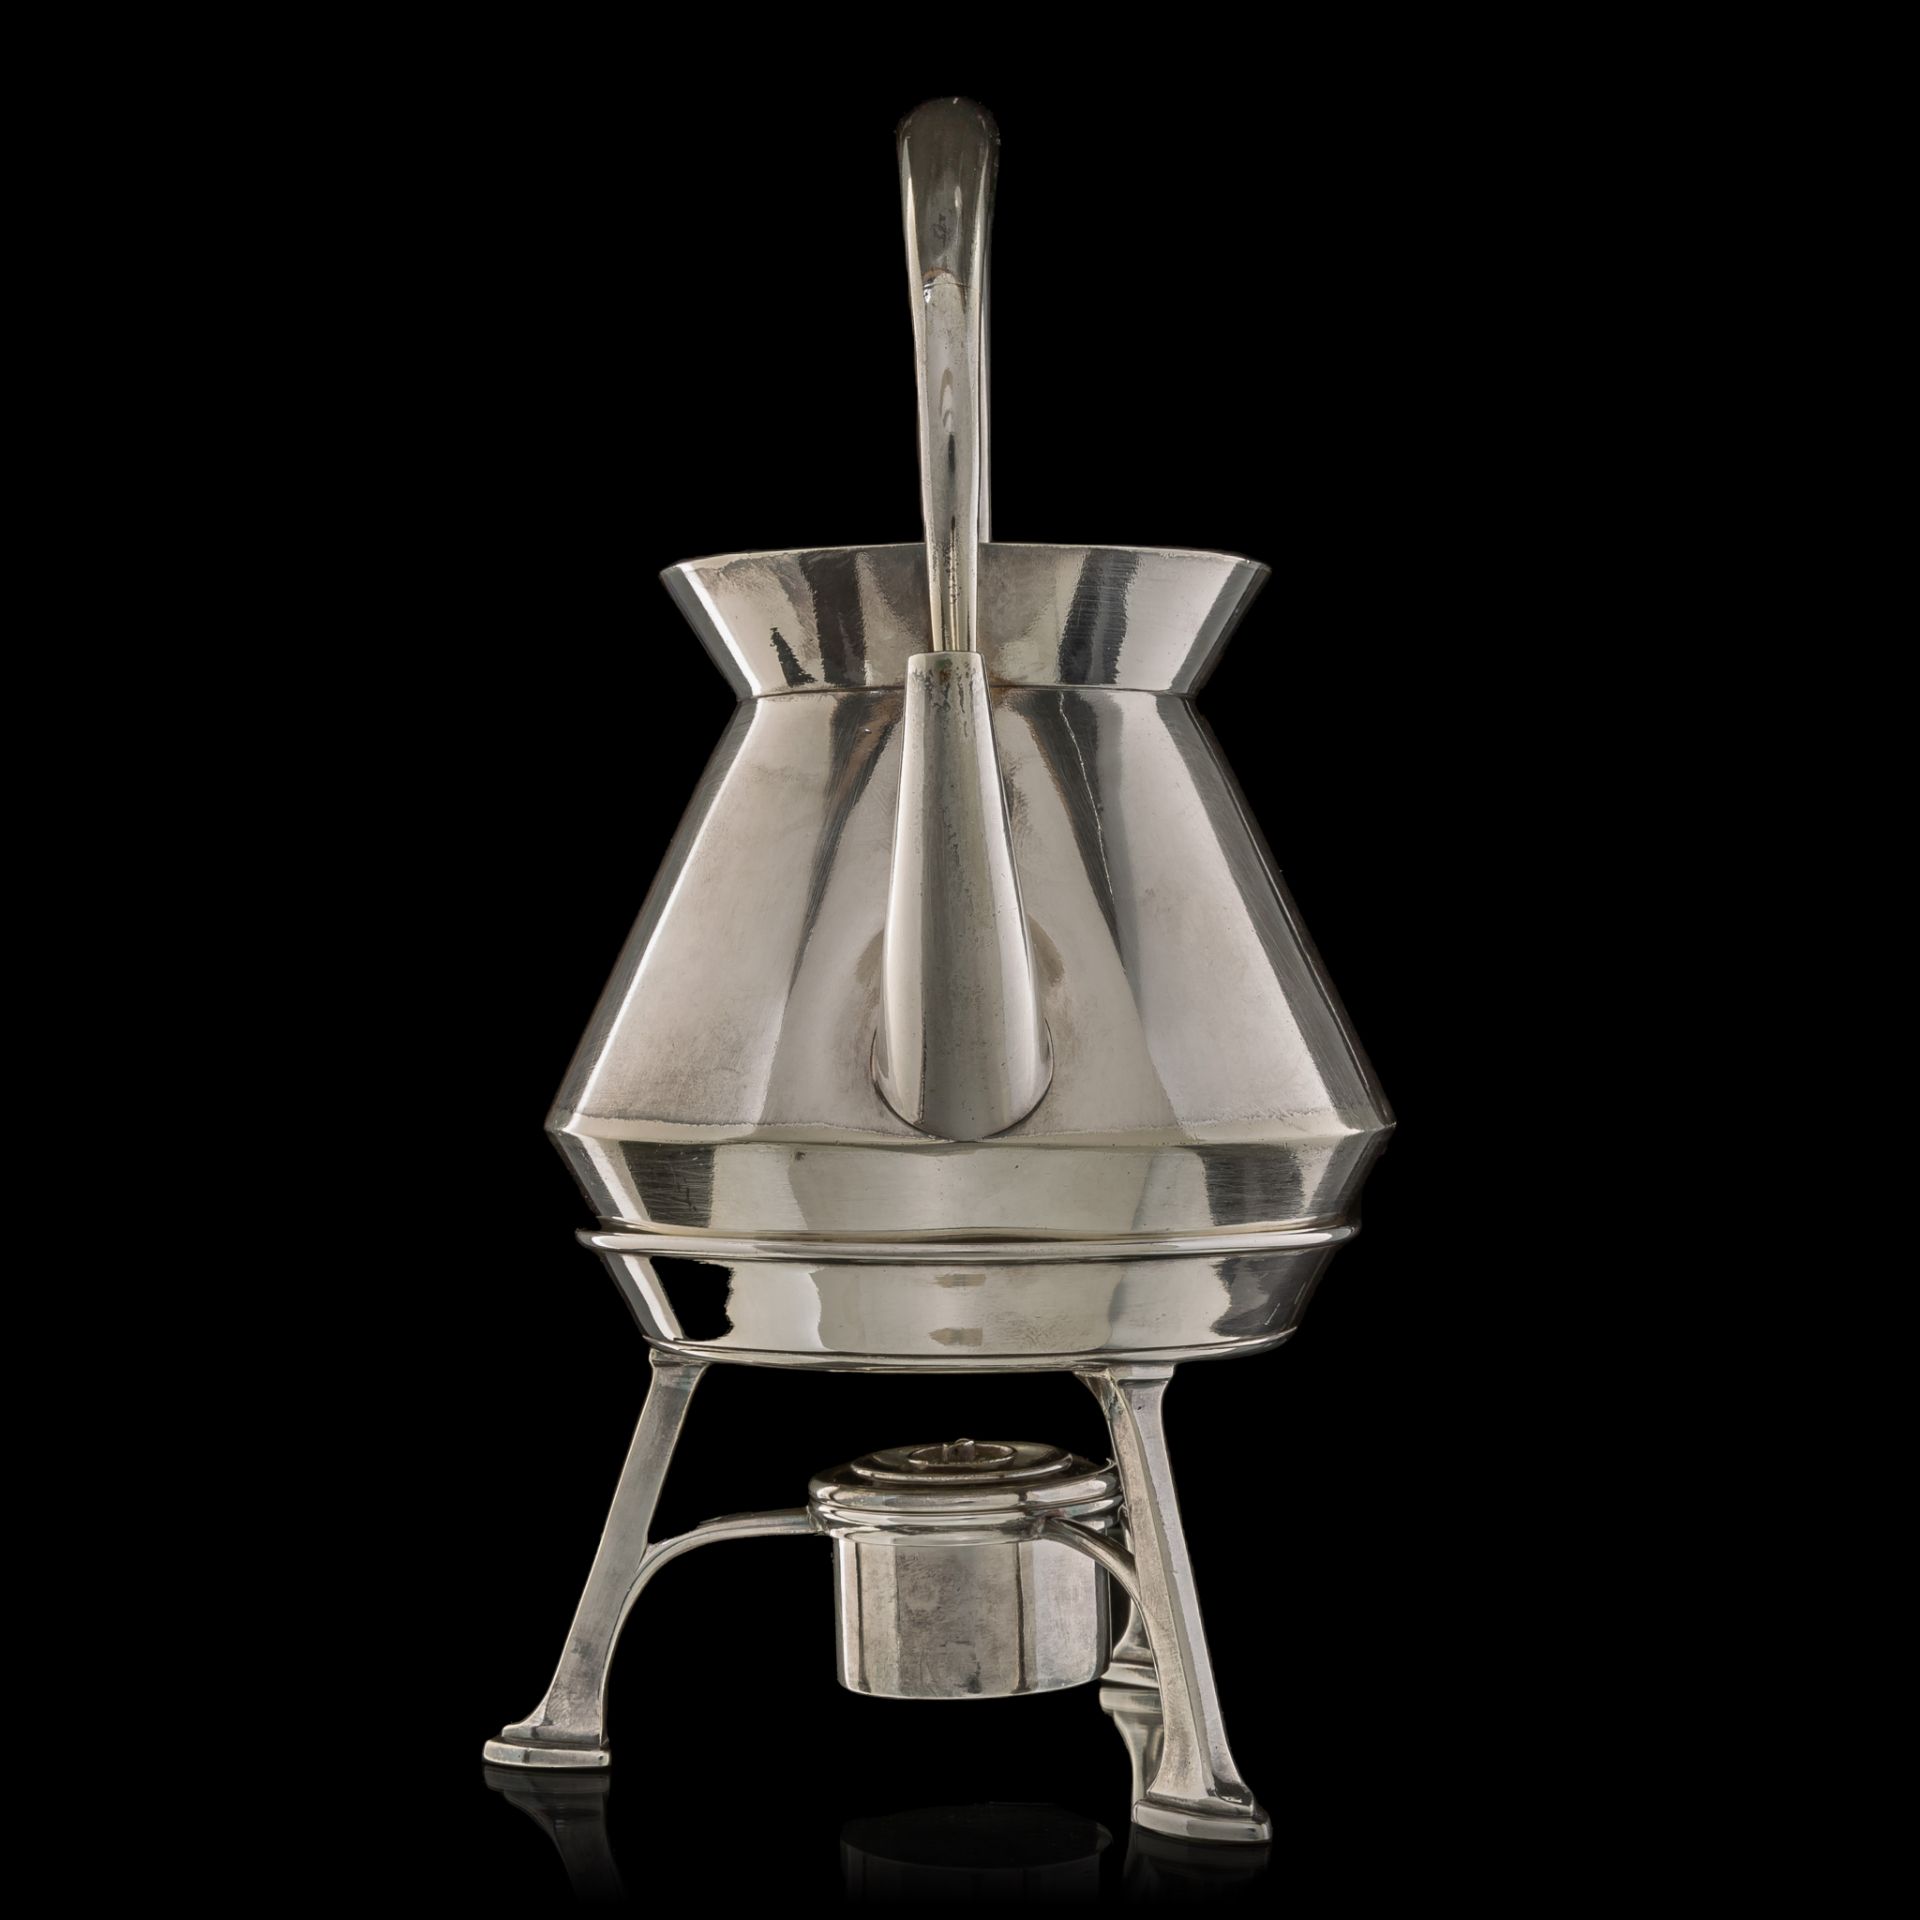 A silver-plated tea kettle, stand and burner, marked Richard Hodd, pre-1884, H 25 cm - Image 2 of 9